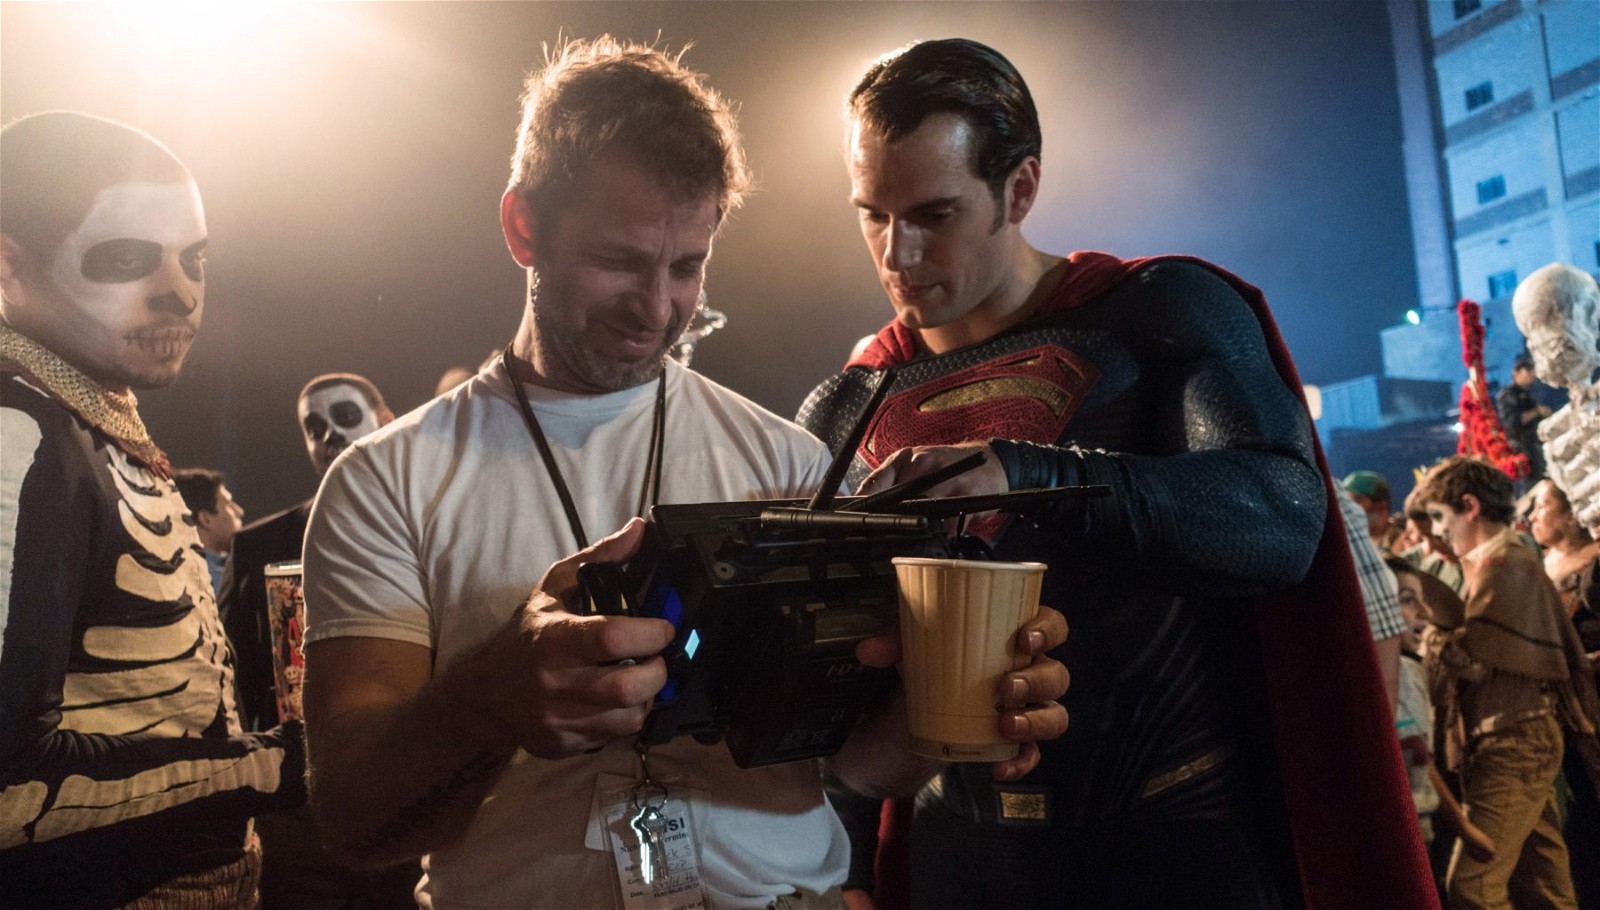 Zack Snyder on the set of Man of Steel with Henry Cavill